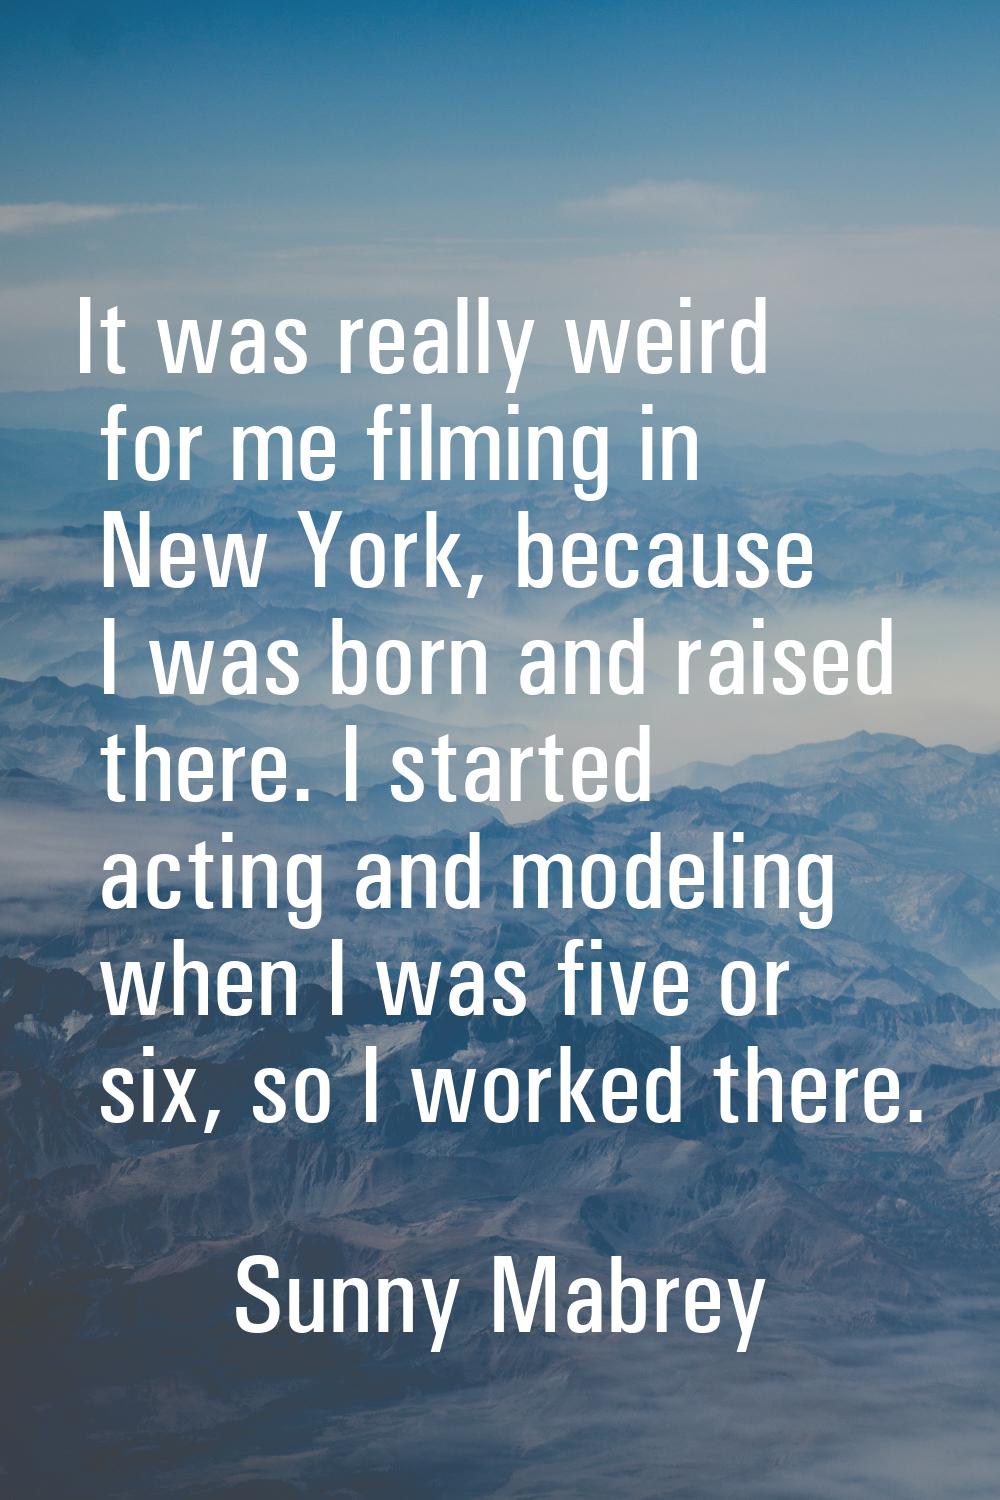 It was really weird for me filming in New York, because I was born and raised there. I started acti